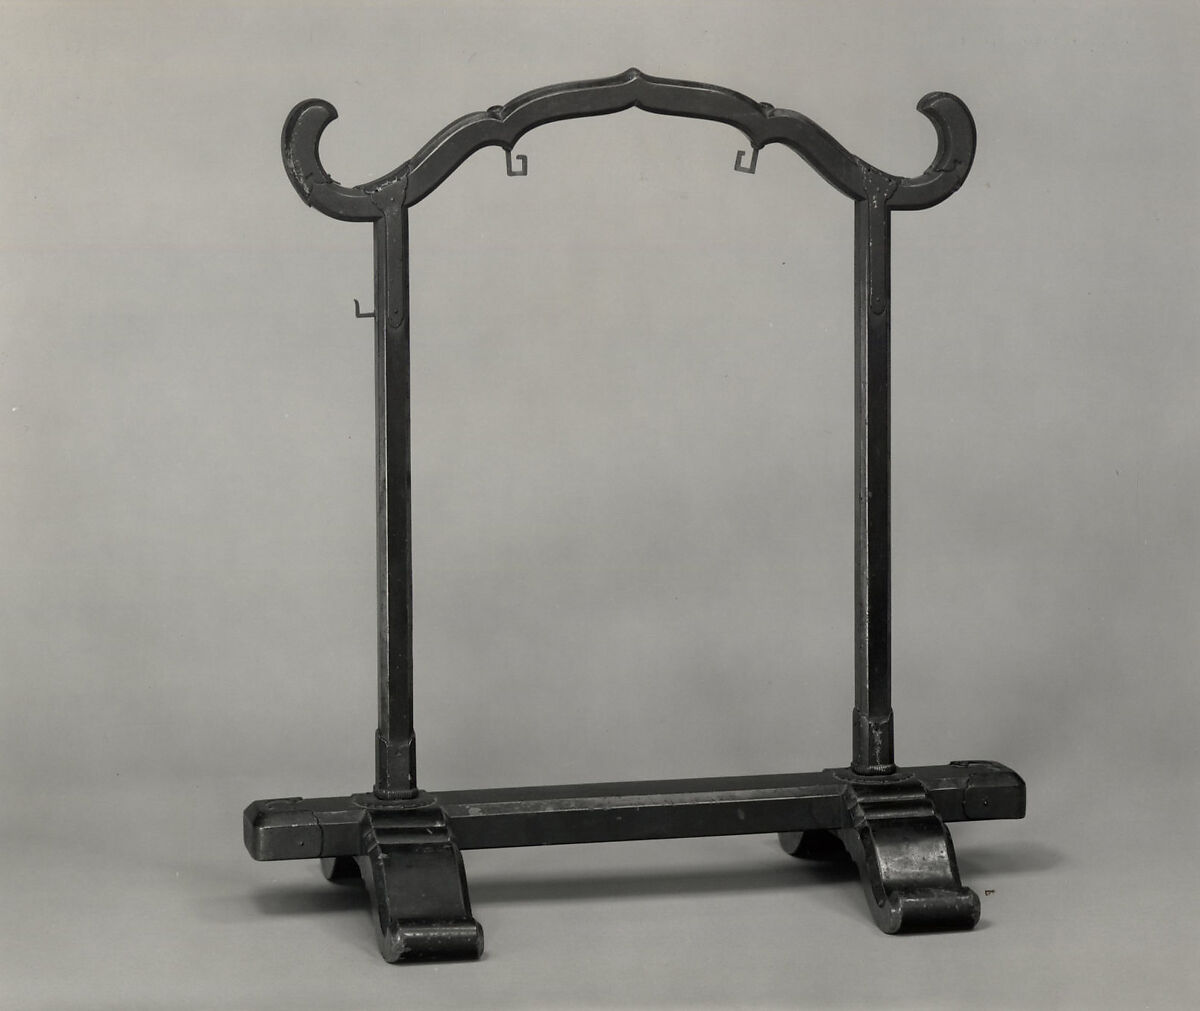 Gong stand, Wood with negoro red lacquer, chased gilt bronze fittings and wrought iron hooks, Japan 